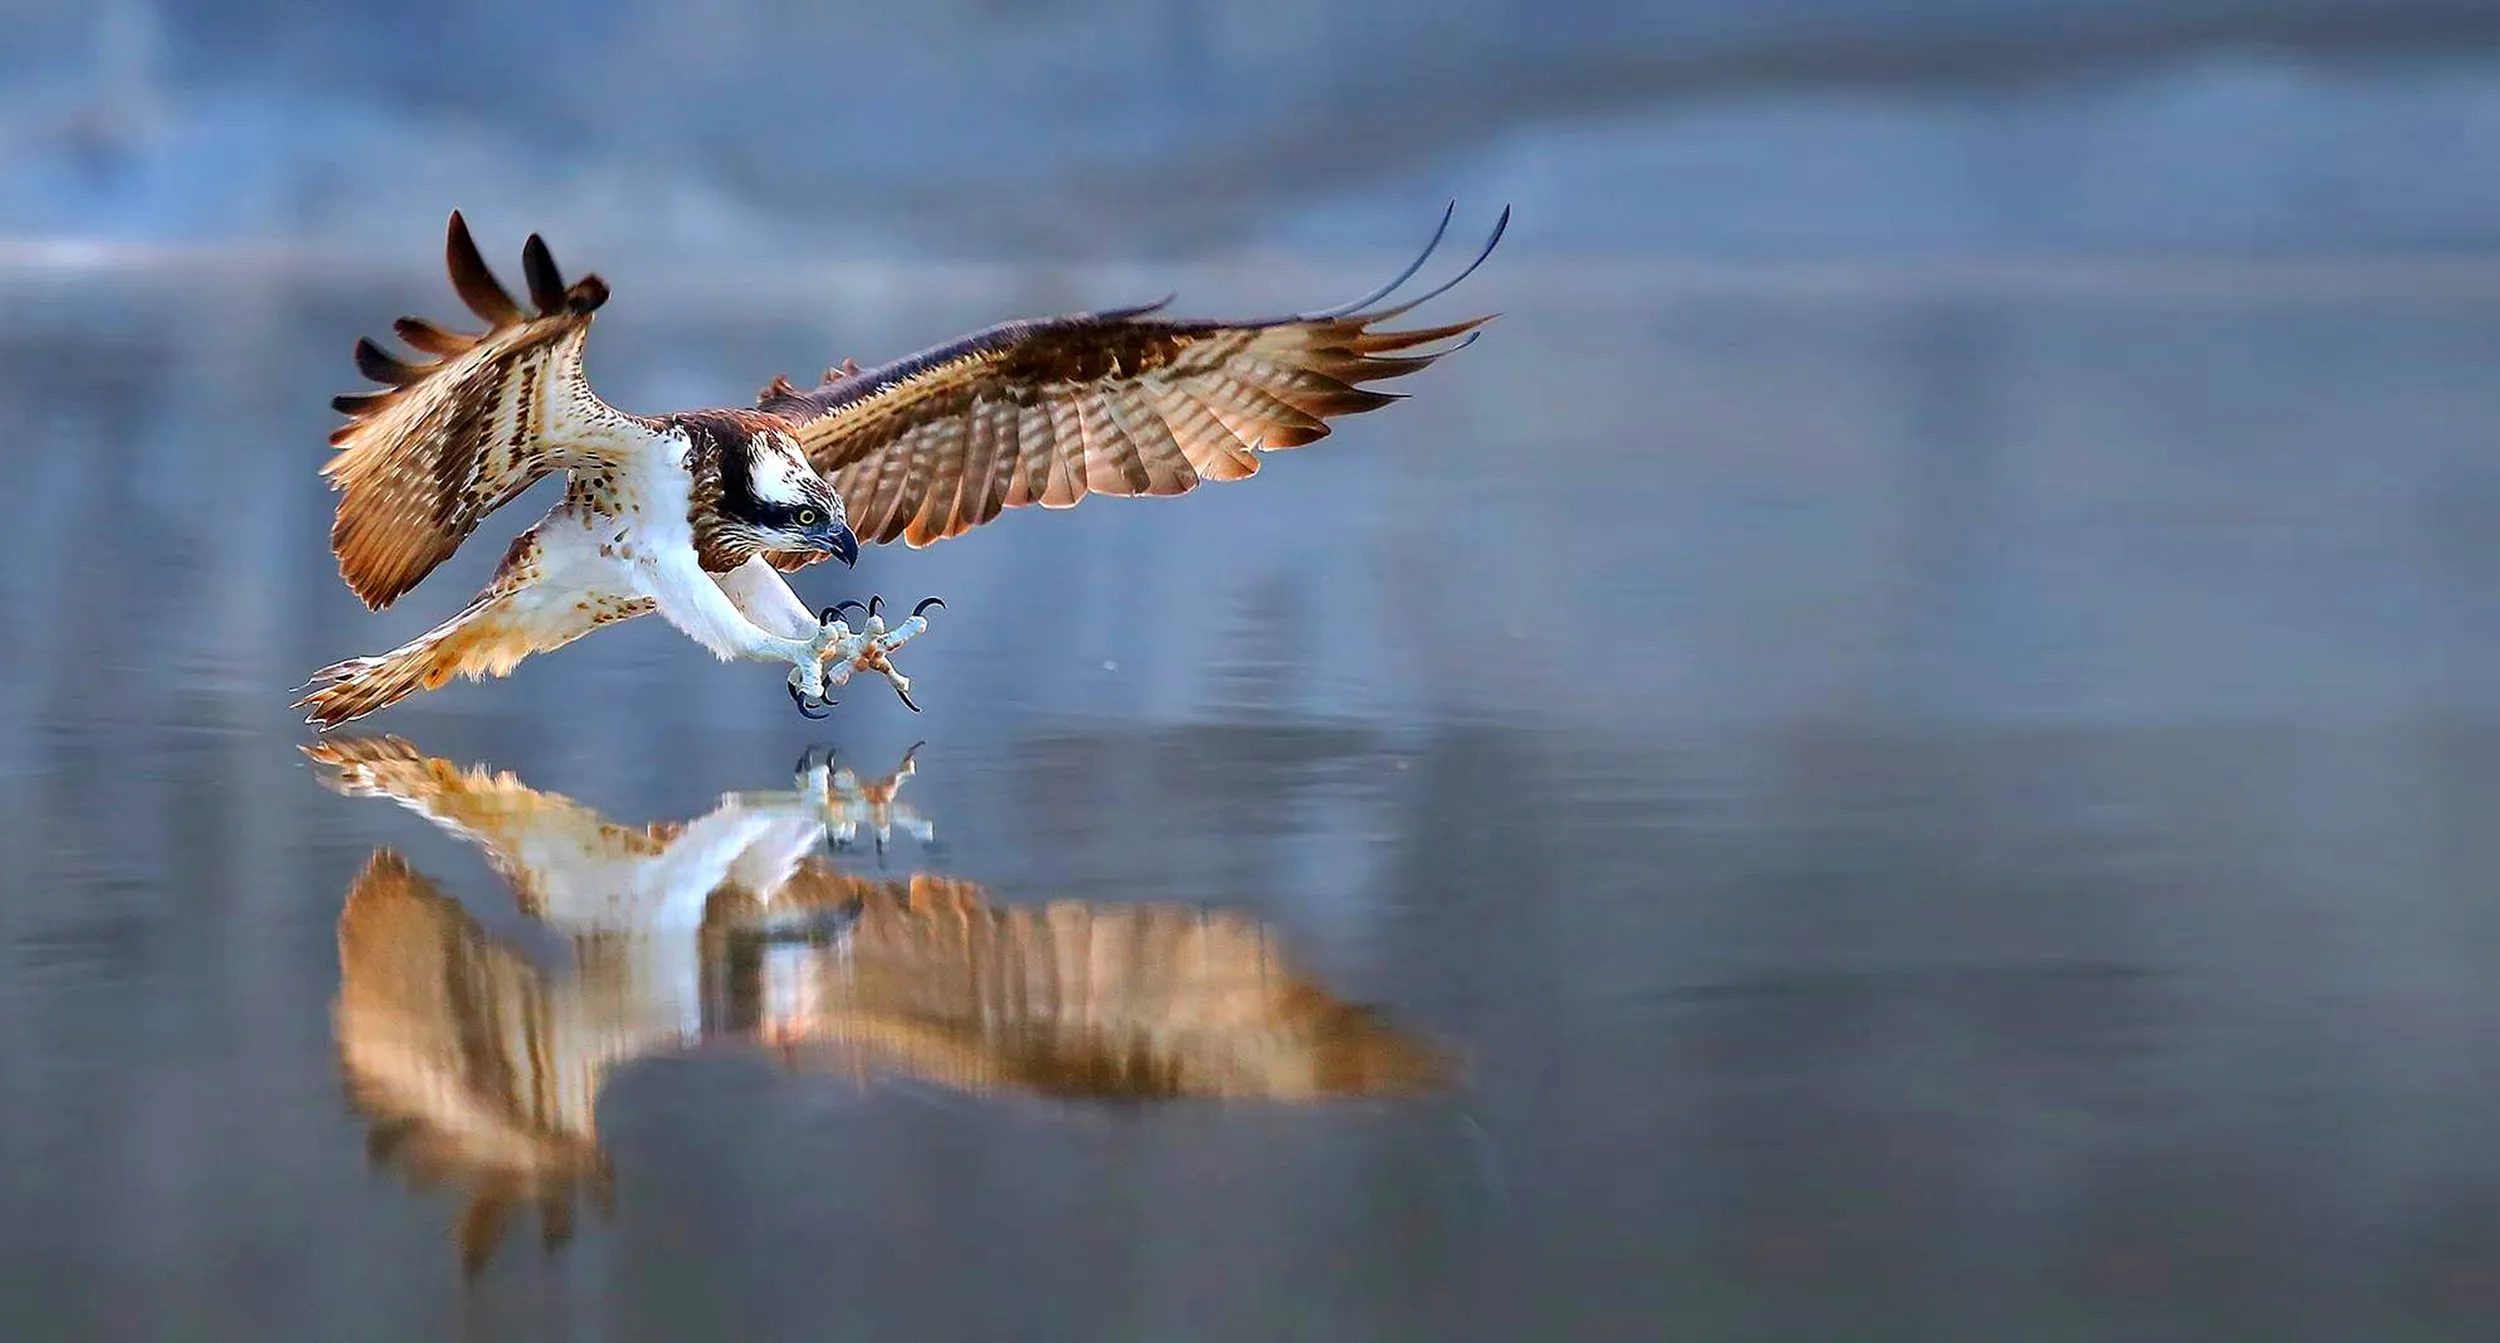 Osprey swooping down with wings outstretched and talons poised to catch prey just below the smooth water's surface